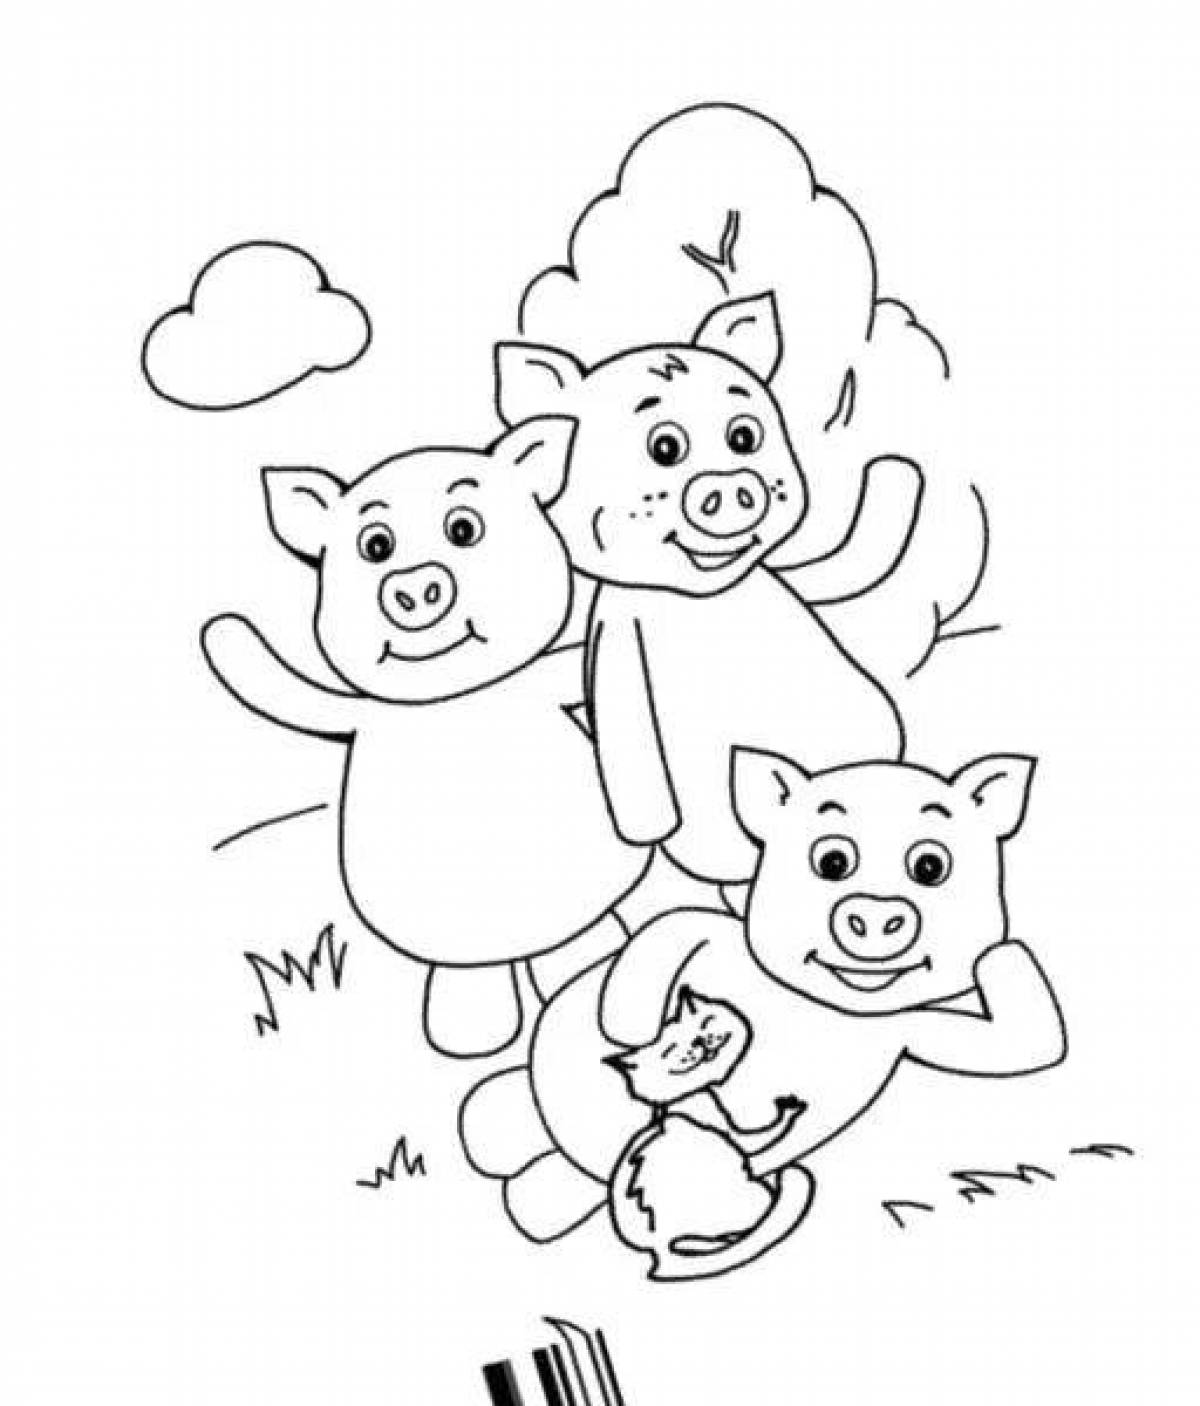 Coloring 3 little pigs with colored splashes